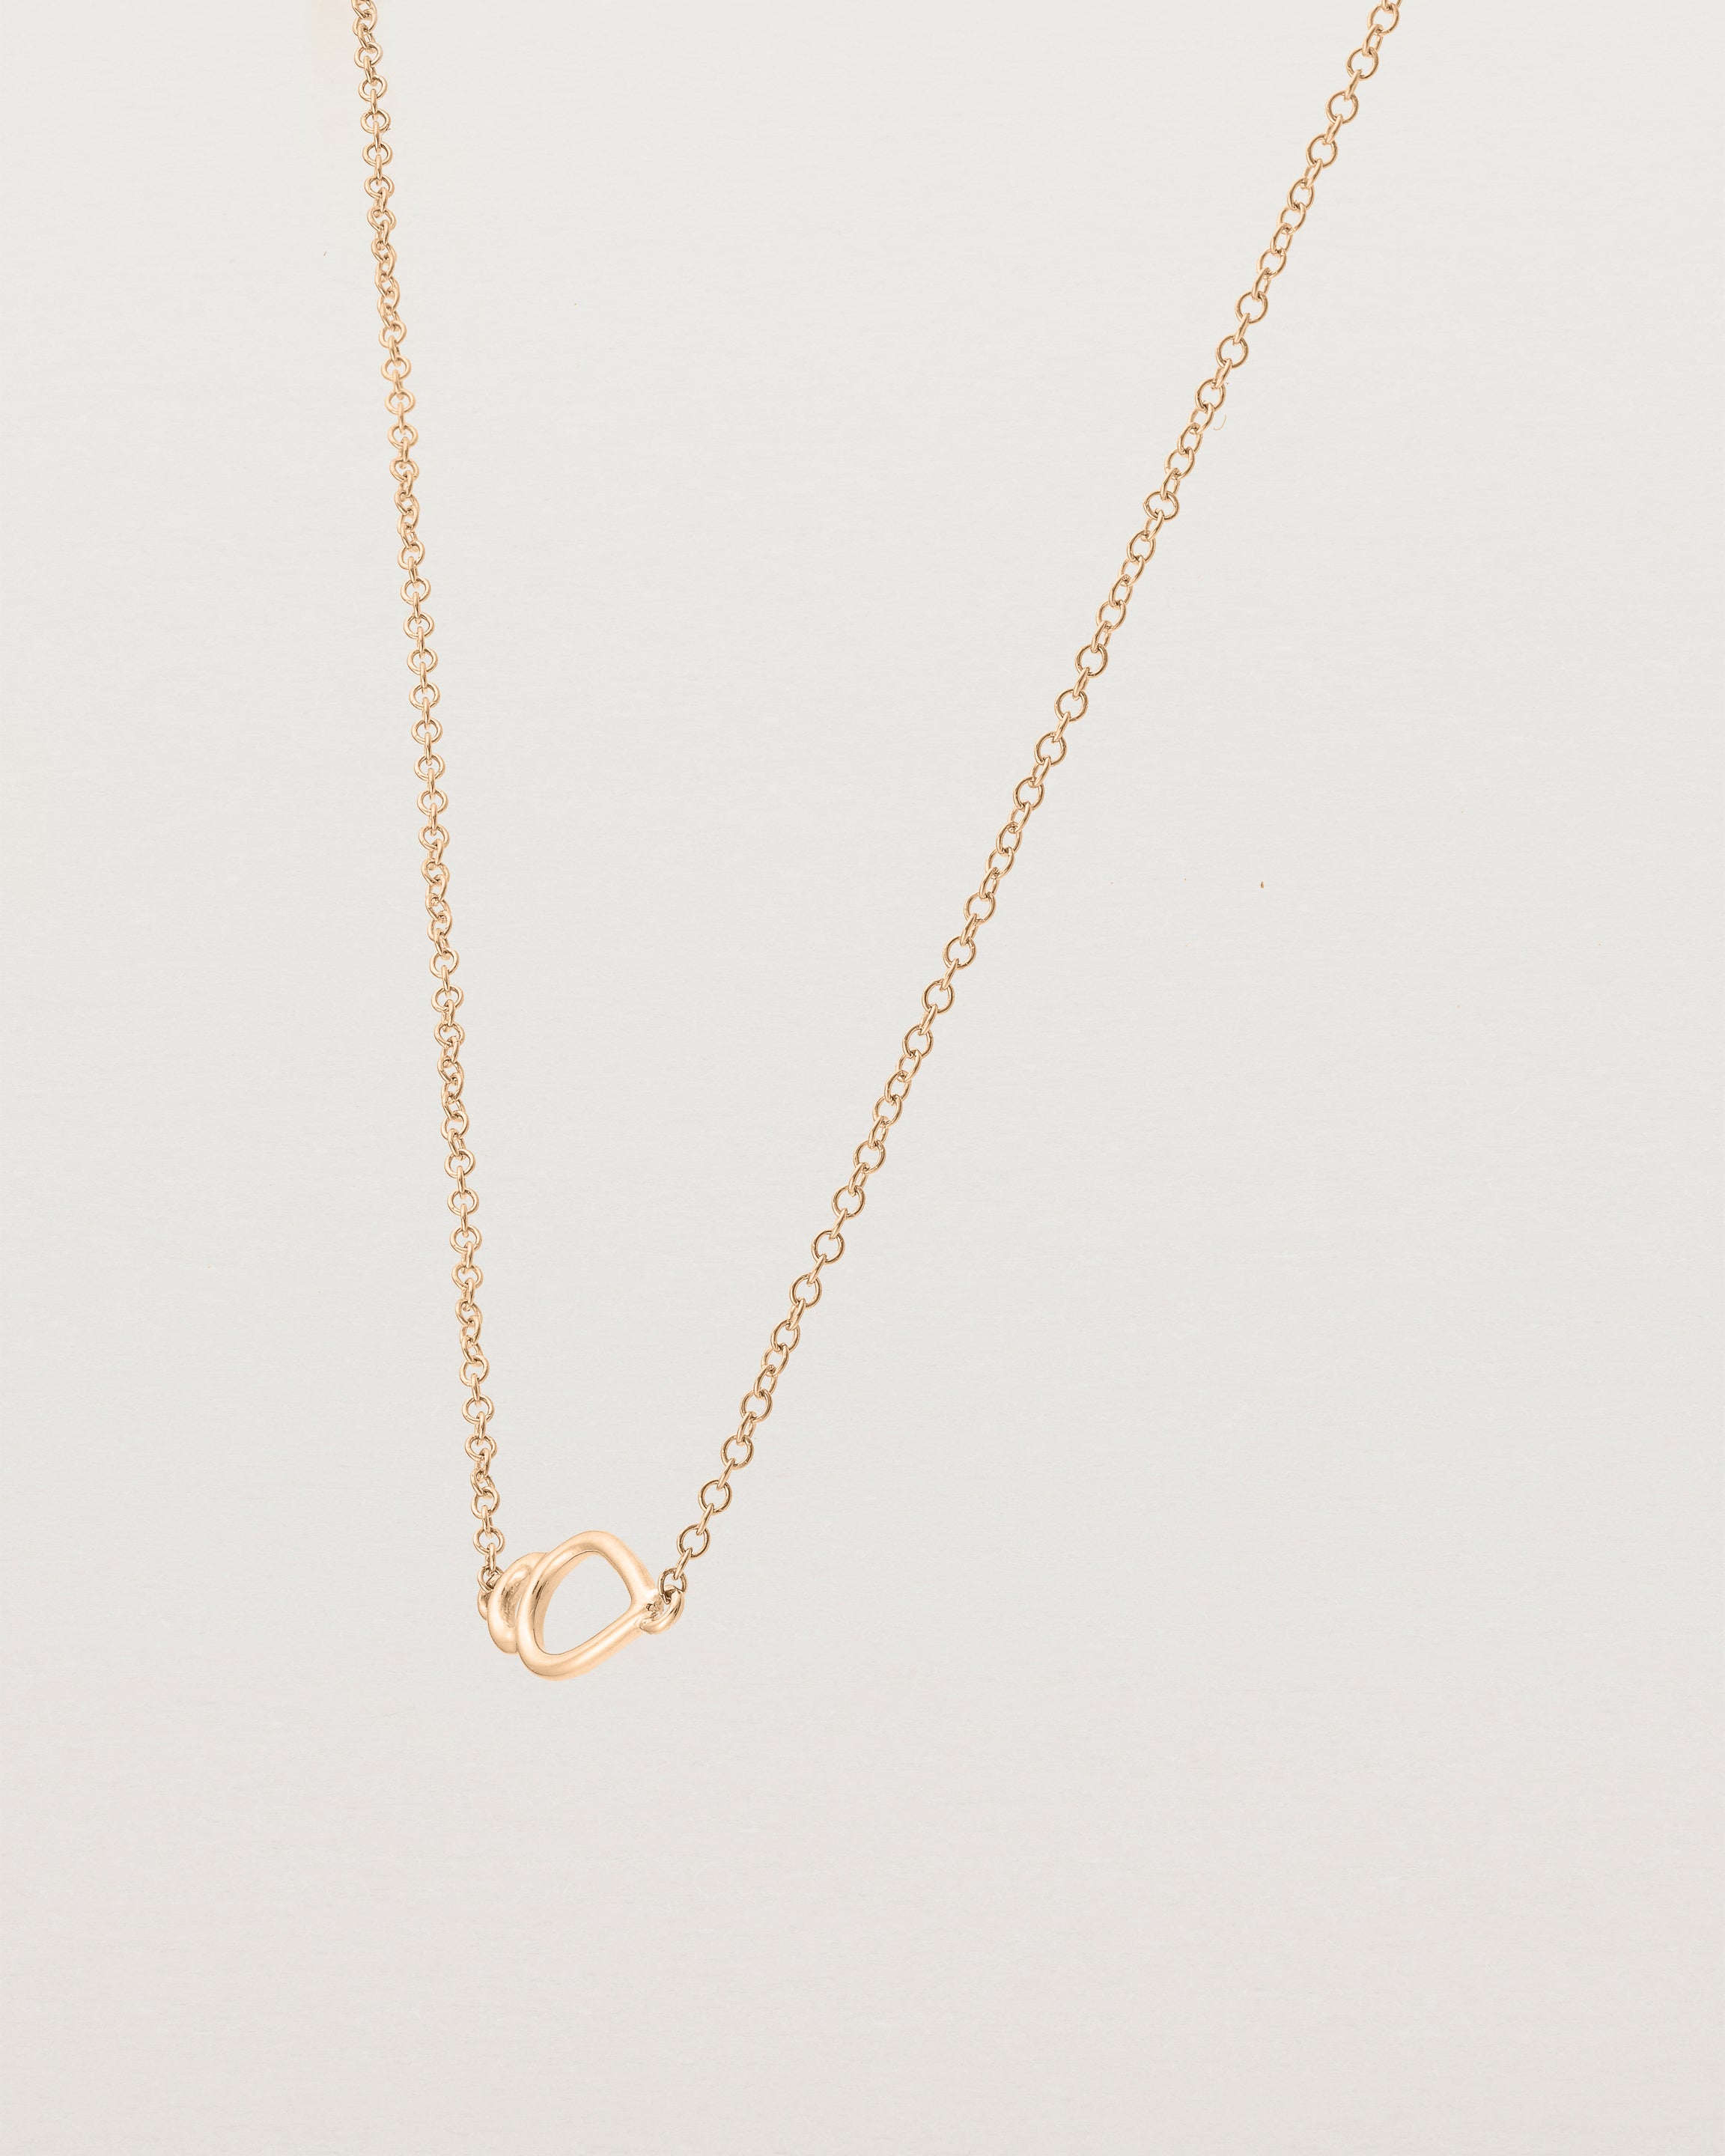 Angled view of  the Oana Necklace in Rose Gold.